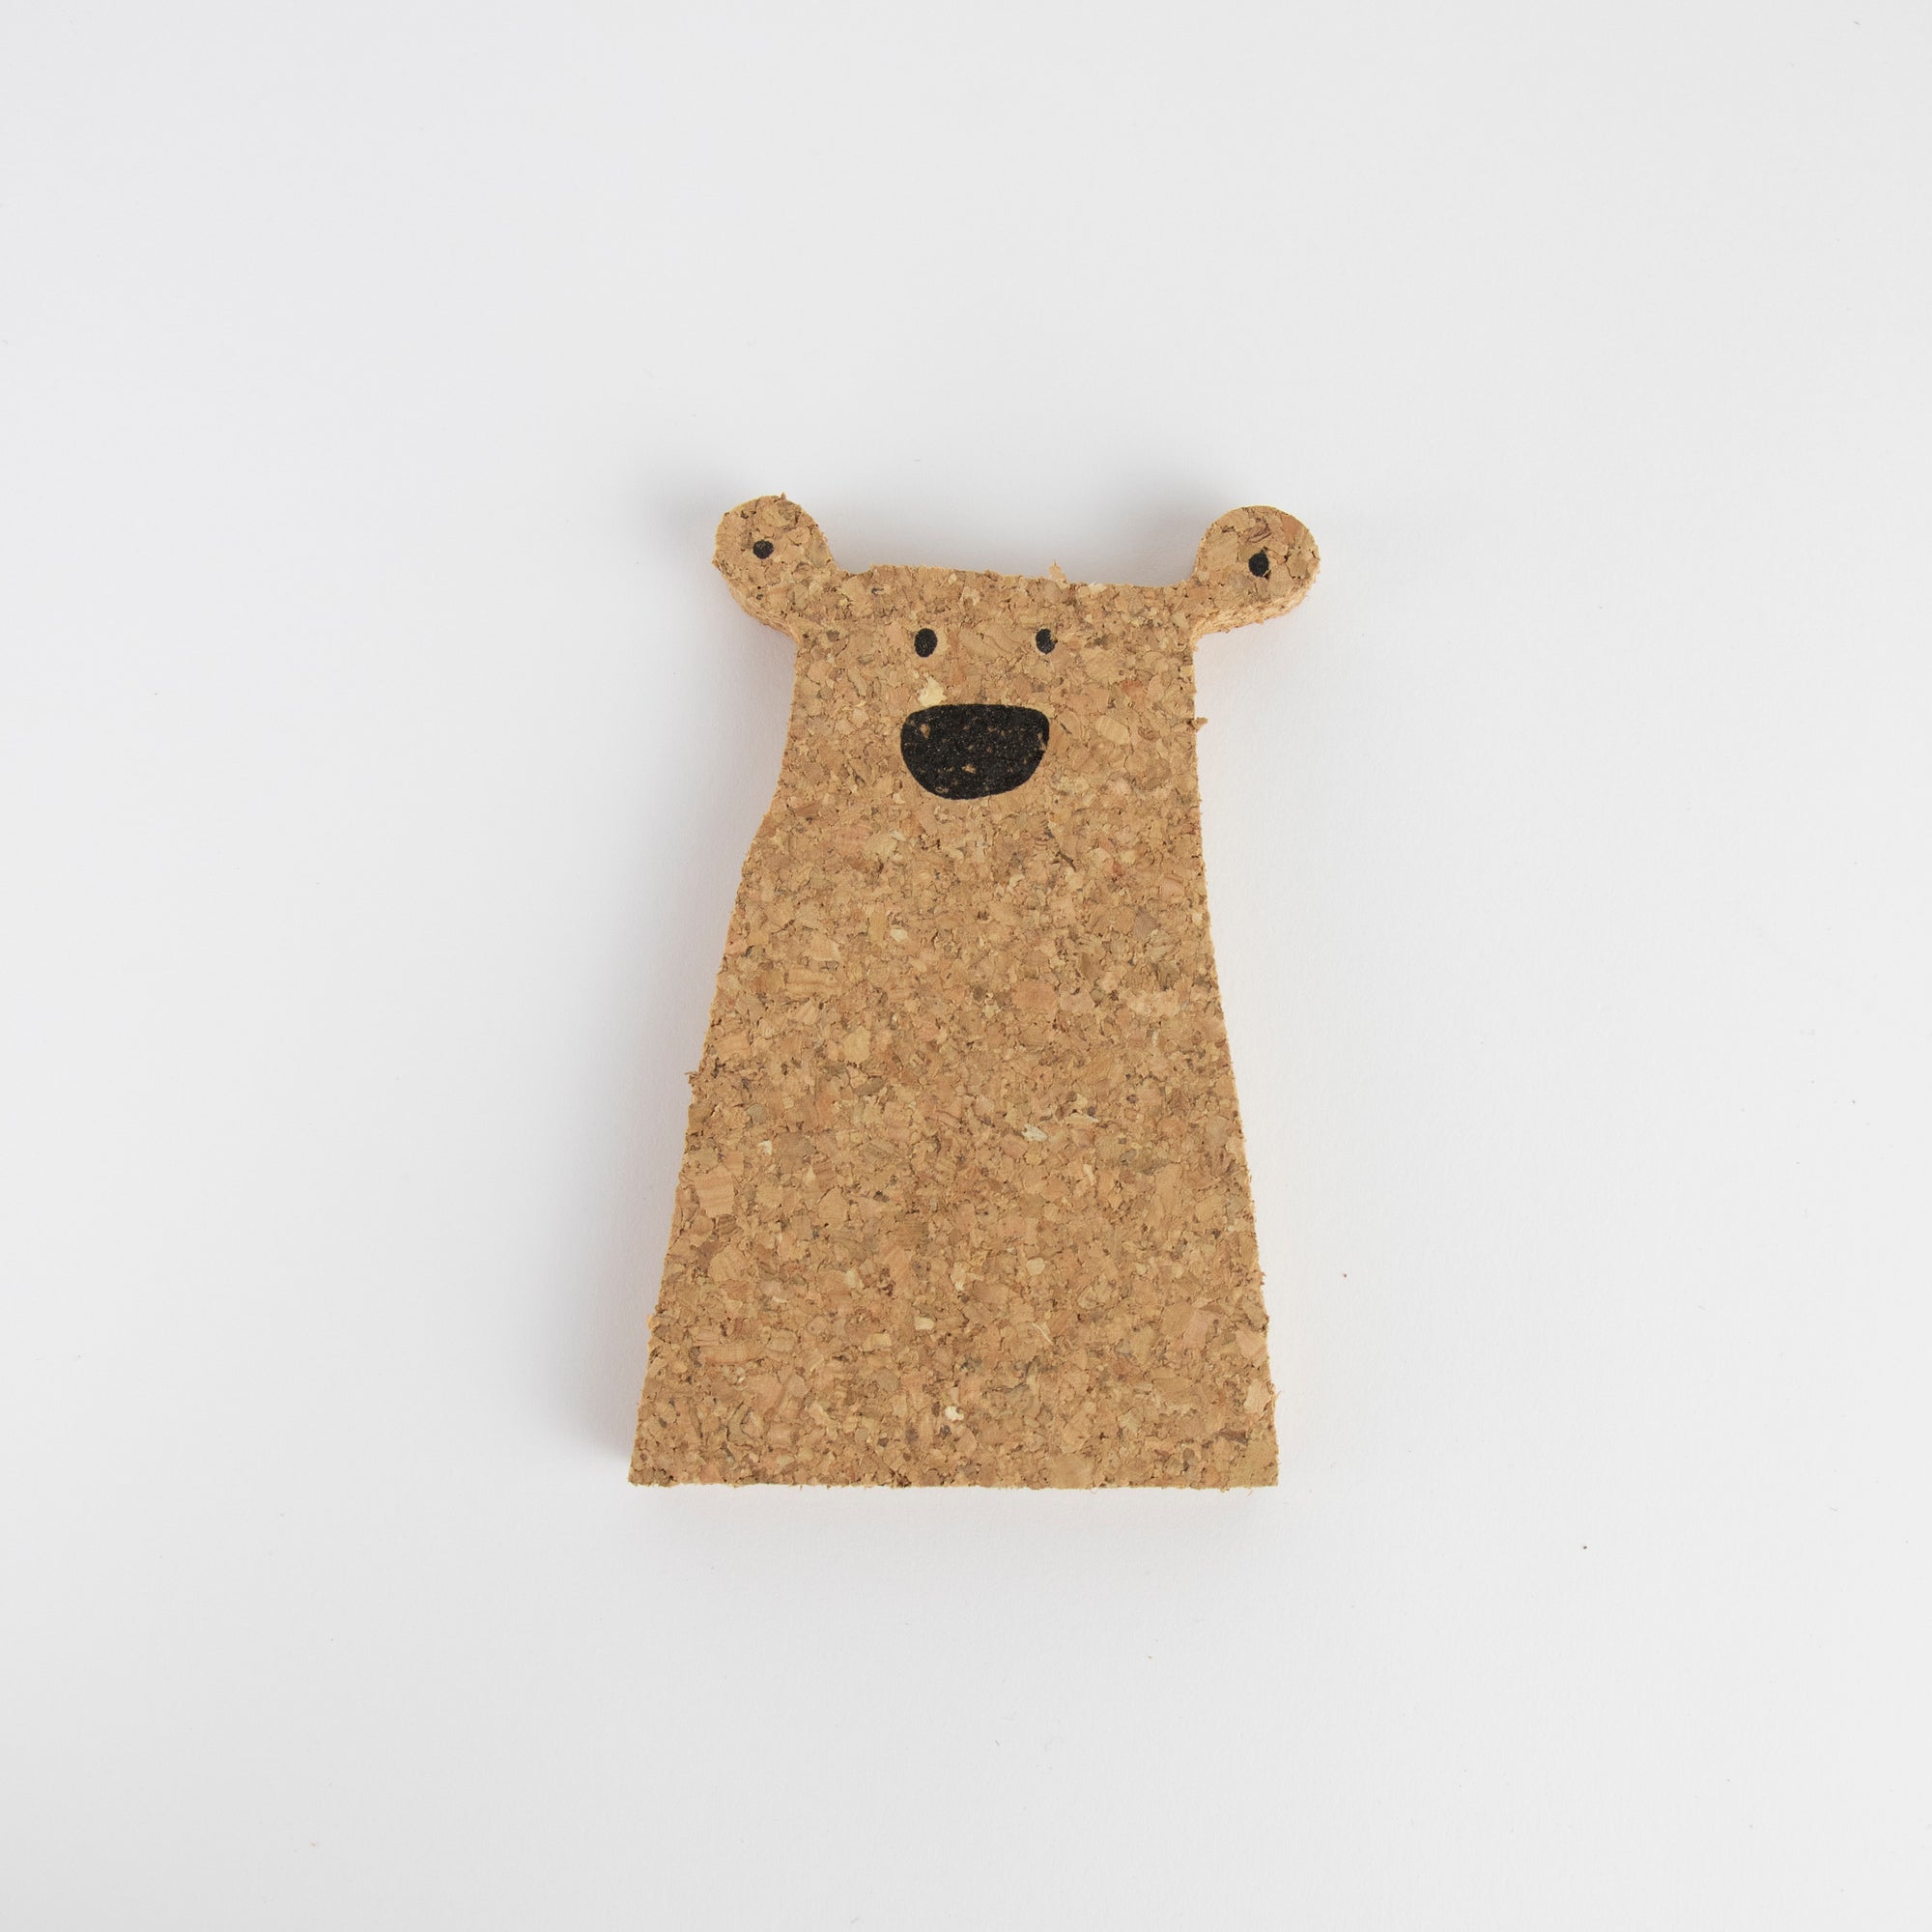 Sustainable cork magnet of Clueless bear